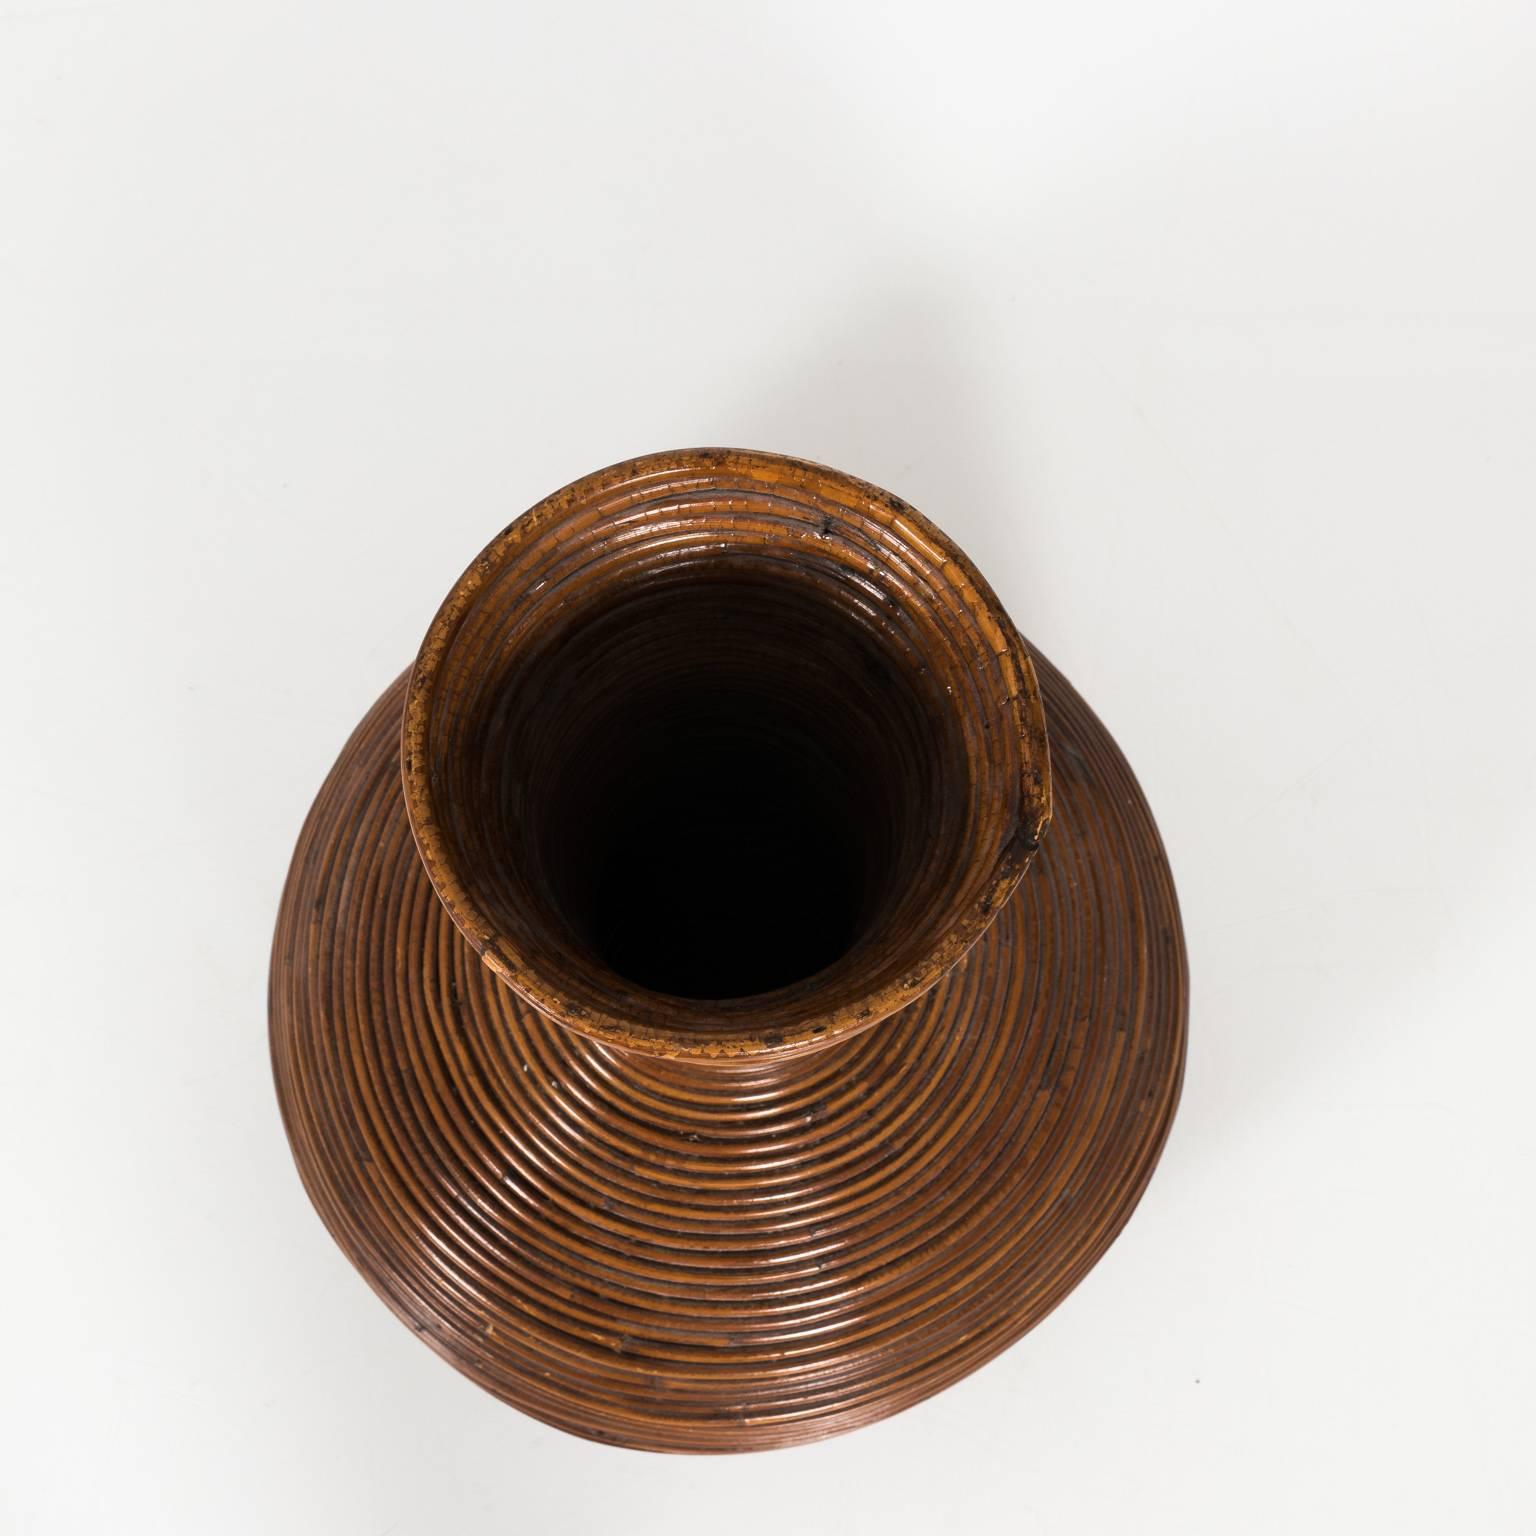 Contemporary brown rattan wrapped vase.
 